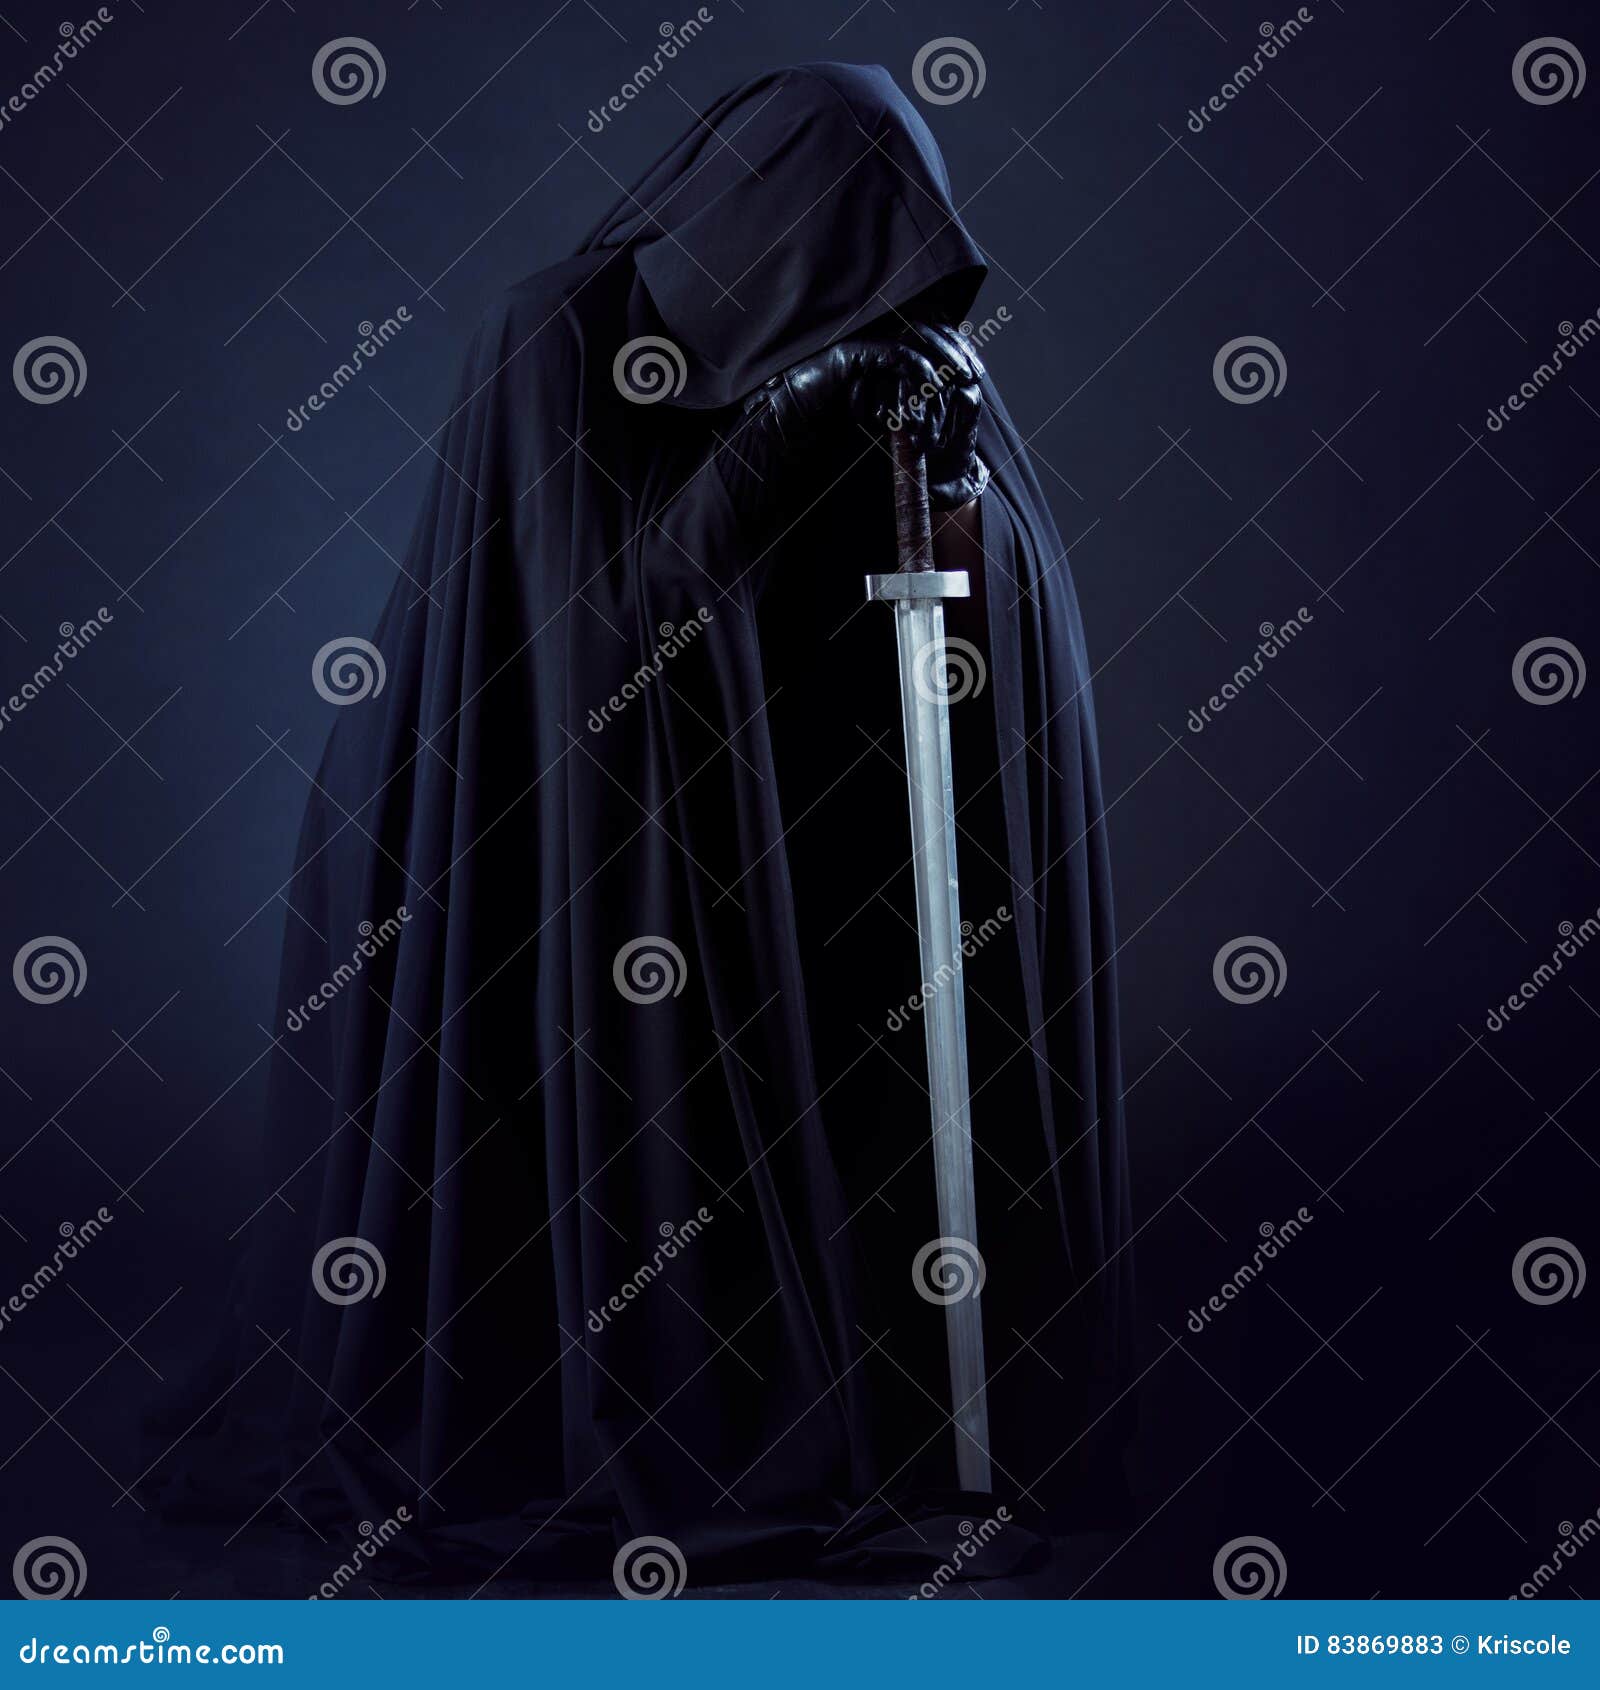 portrait of a courageous warrior wanderer in a black cloak and sword in hand.